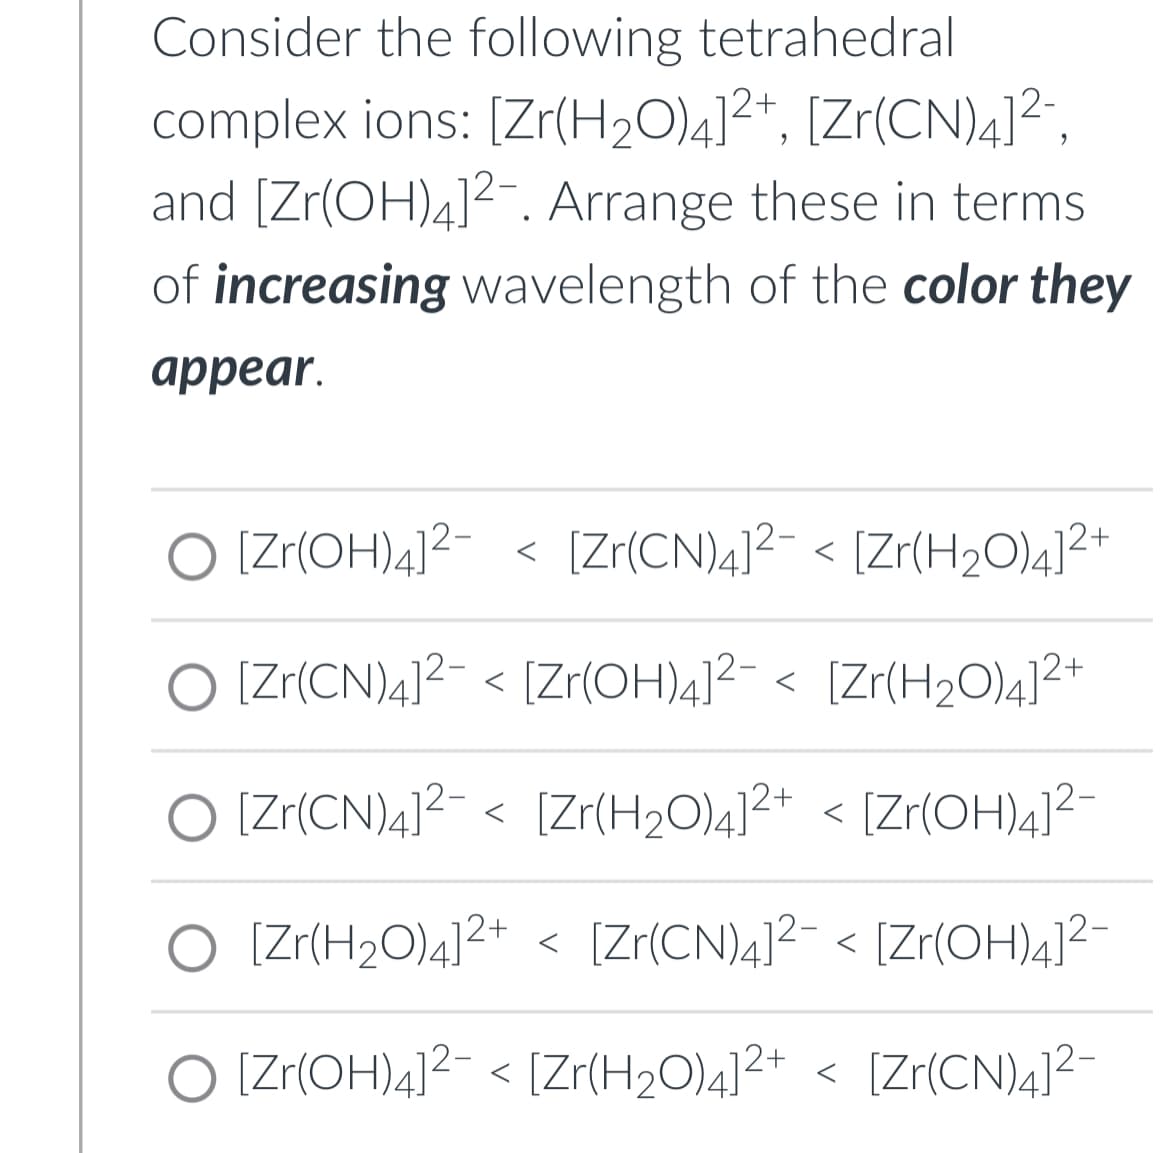 Consider the following tetrahedral
complex ions: [Zr(H₂O)4]²+, [Zr(CN)4]²¯,
and [Zr(OH)4]². Arrange these in terms
of increasing wavelength of the color they
appear.
[Zr(OH)4]²- < [Zr(CN)4]² < [Zr(H₂O)4]²+
O [Zr(CN)4]²- < [Zr(OH)4]²¯ < [Zr(H₂O)4]²+
[Zr(CN)4]² < [Zr(H₂O)4]²+ < [Zr(OH)4]²-
O [Zr(H₂O)4]²+ < [Zr(CN)4]²¯ < [Zr(OH)4]²-
[Zr(OH)4]² < [Zr(H₂O)4]²+ < [Zr(CN)4]²-